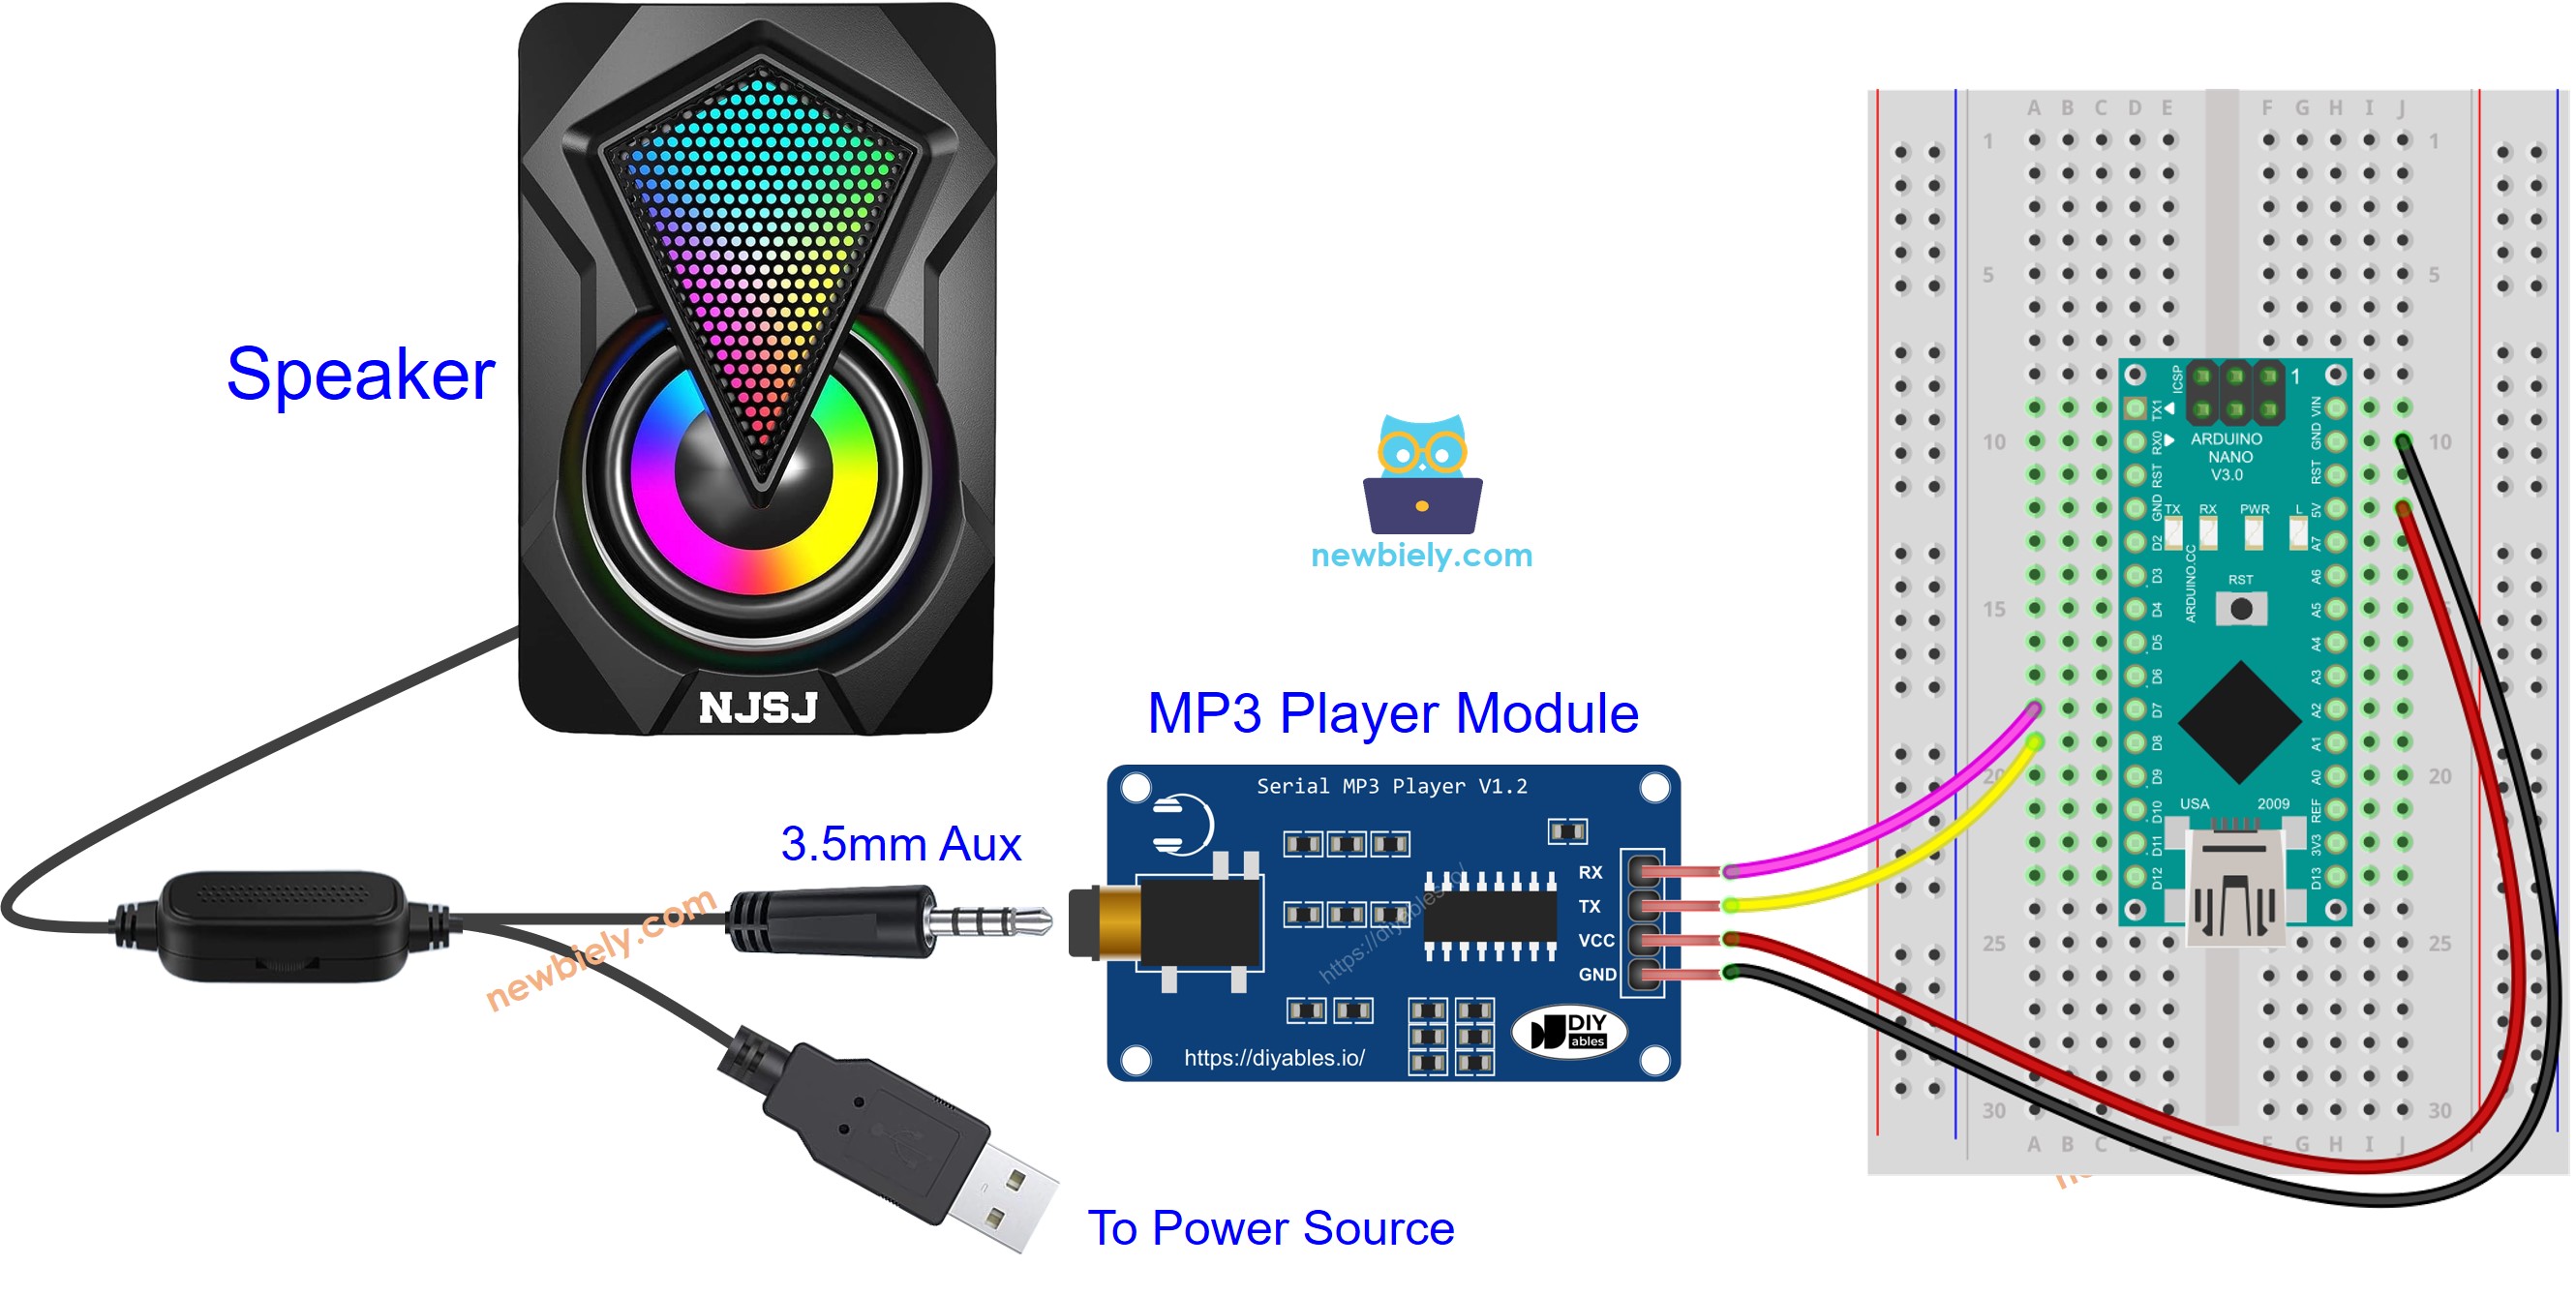 The wiring diagram between Arduino Nano and MP3 player module